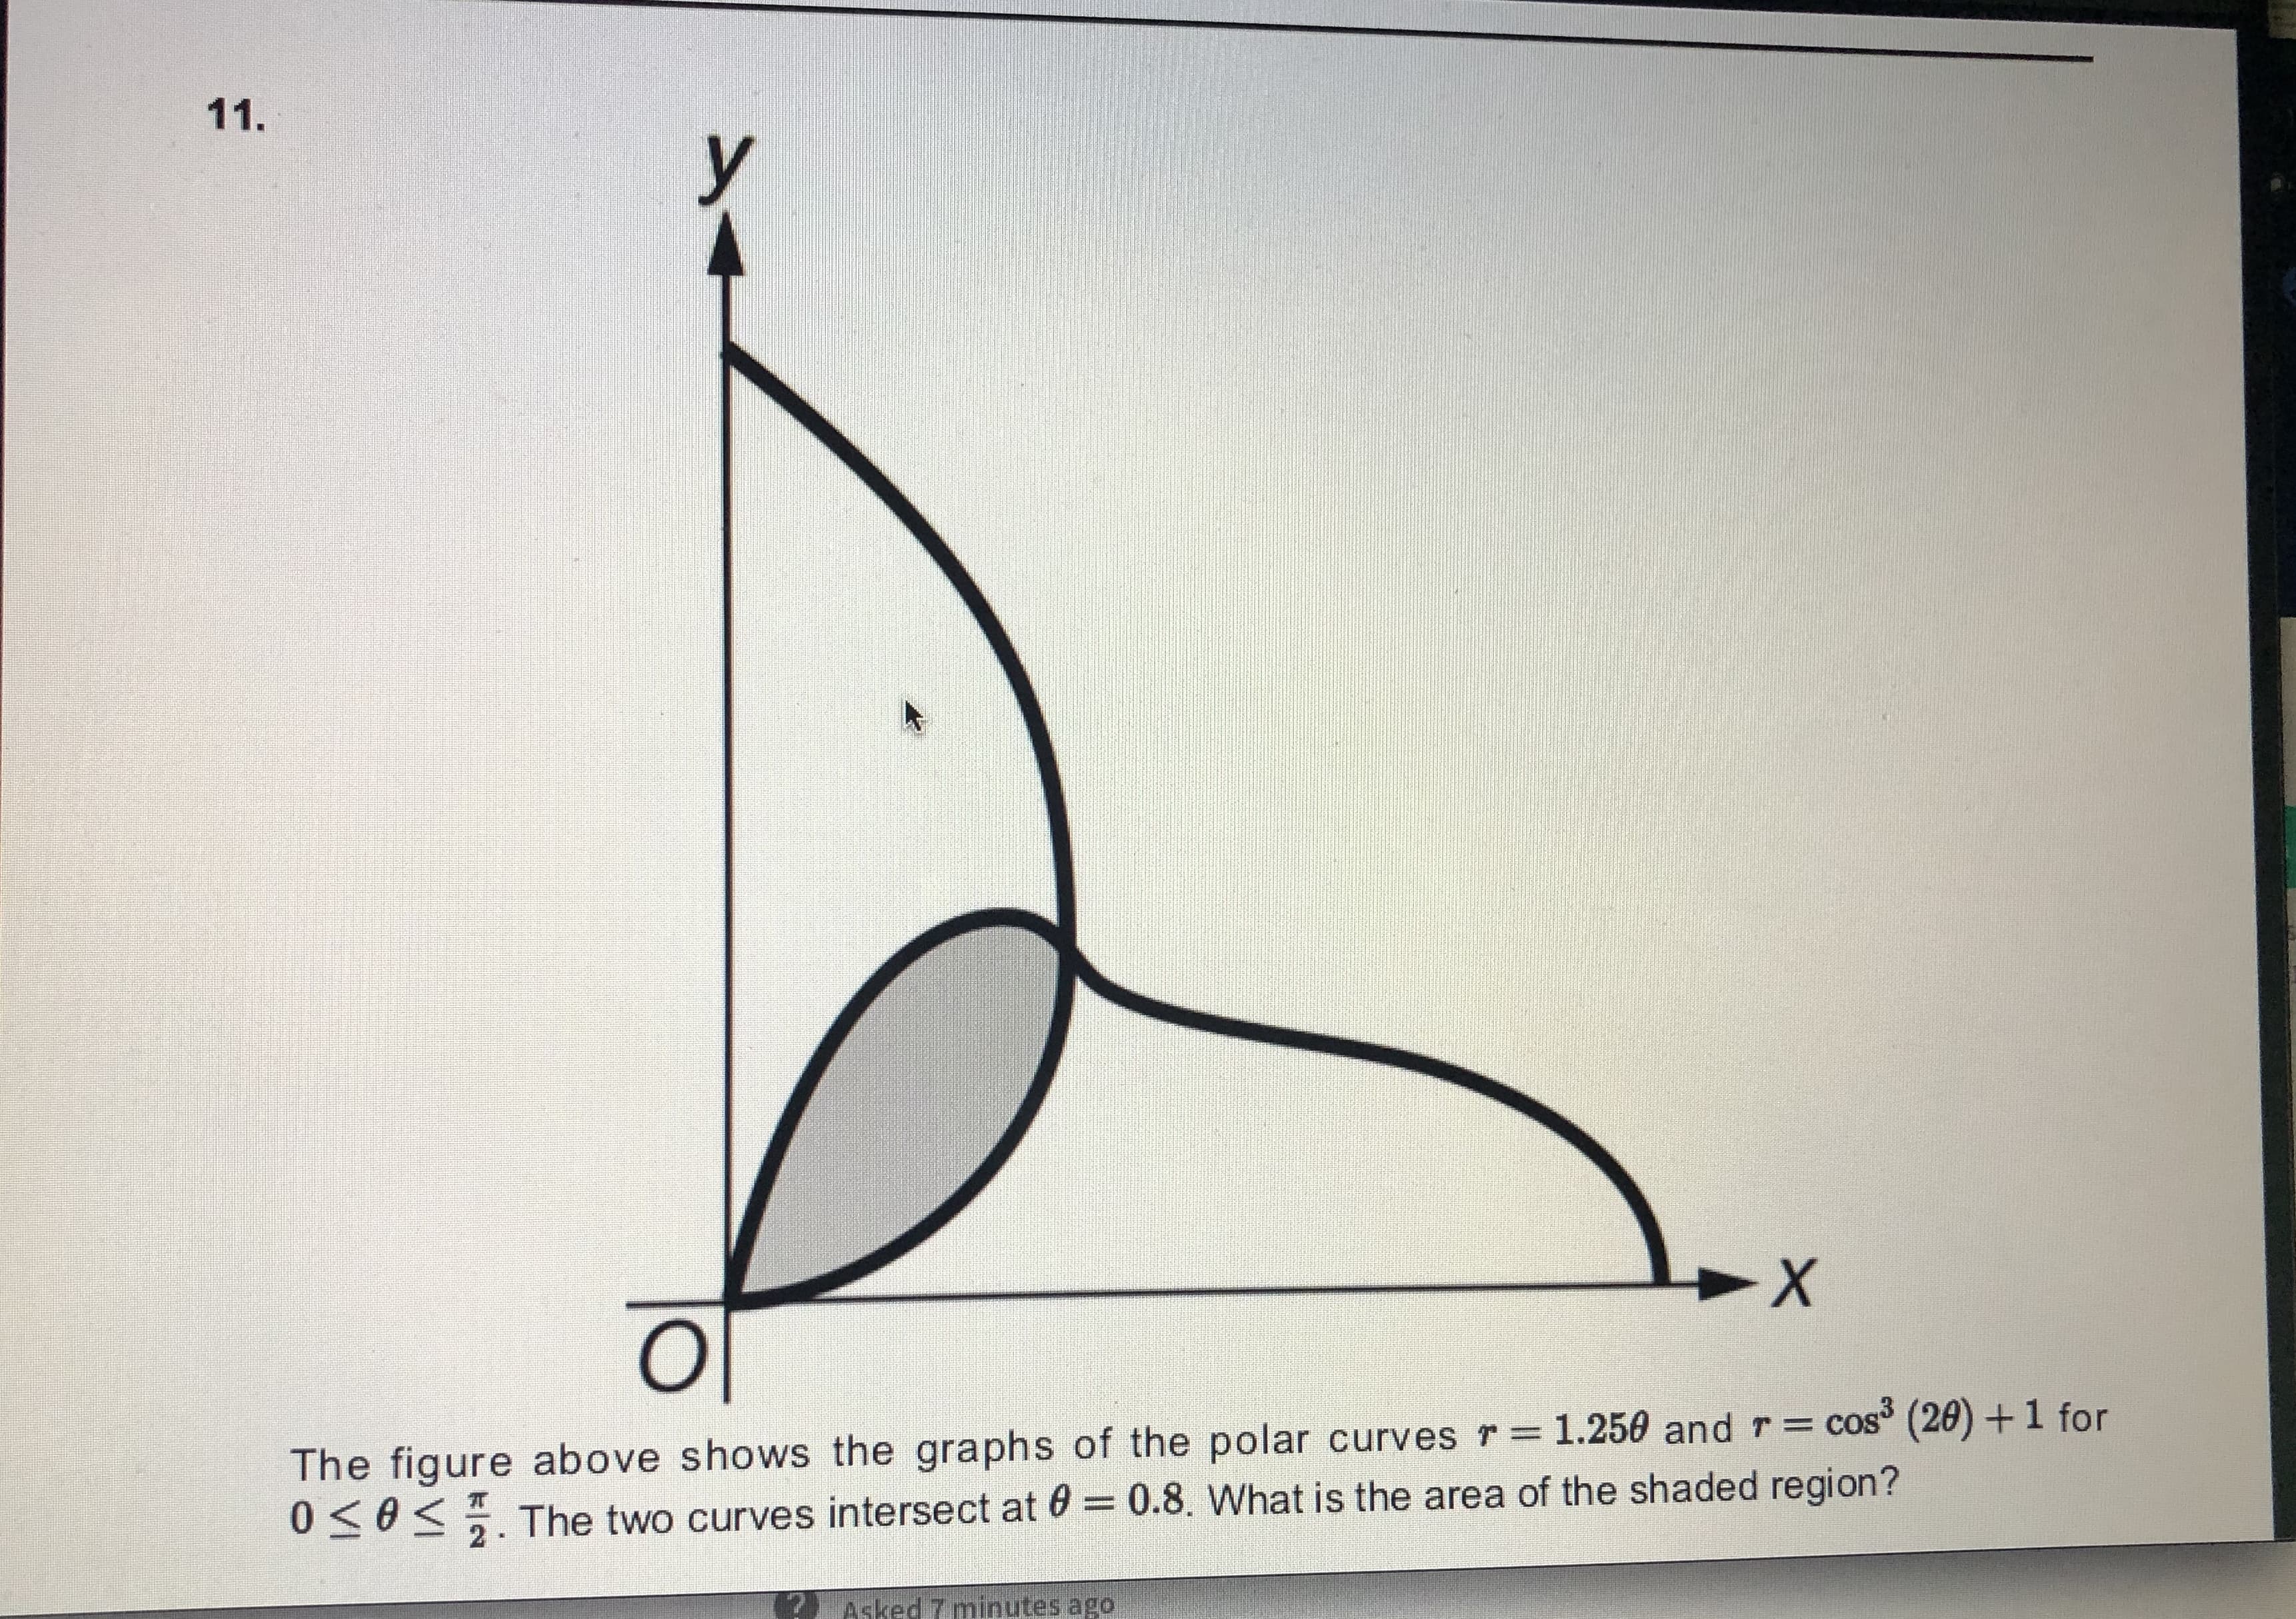 11.
The figure above shows the graphs of the polar curves r = 1.250 and r= cos (20) +1 for
0305. The two curves intersect at 0 = 0.8. What is the area of the shaded region?
%3D
Asked 7 minutes ago
